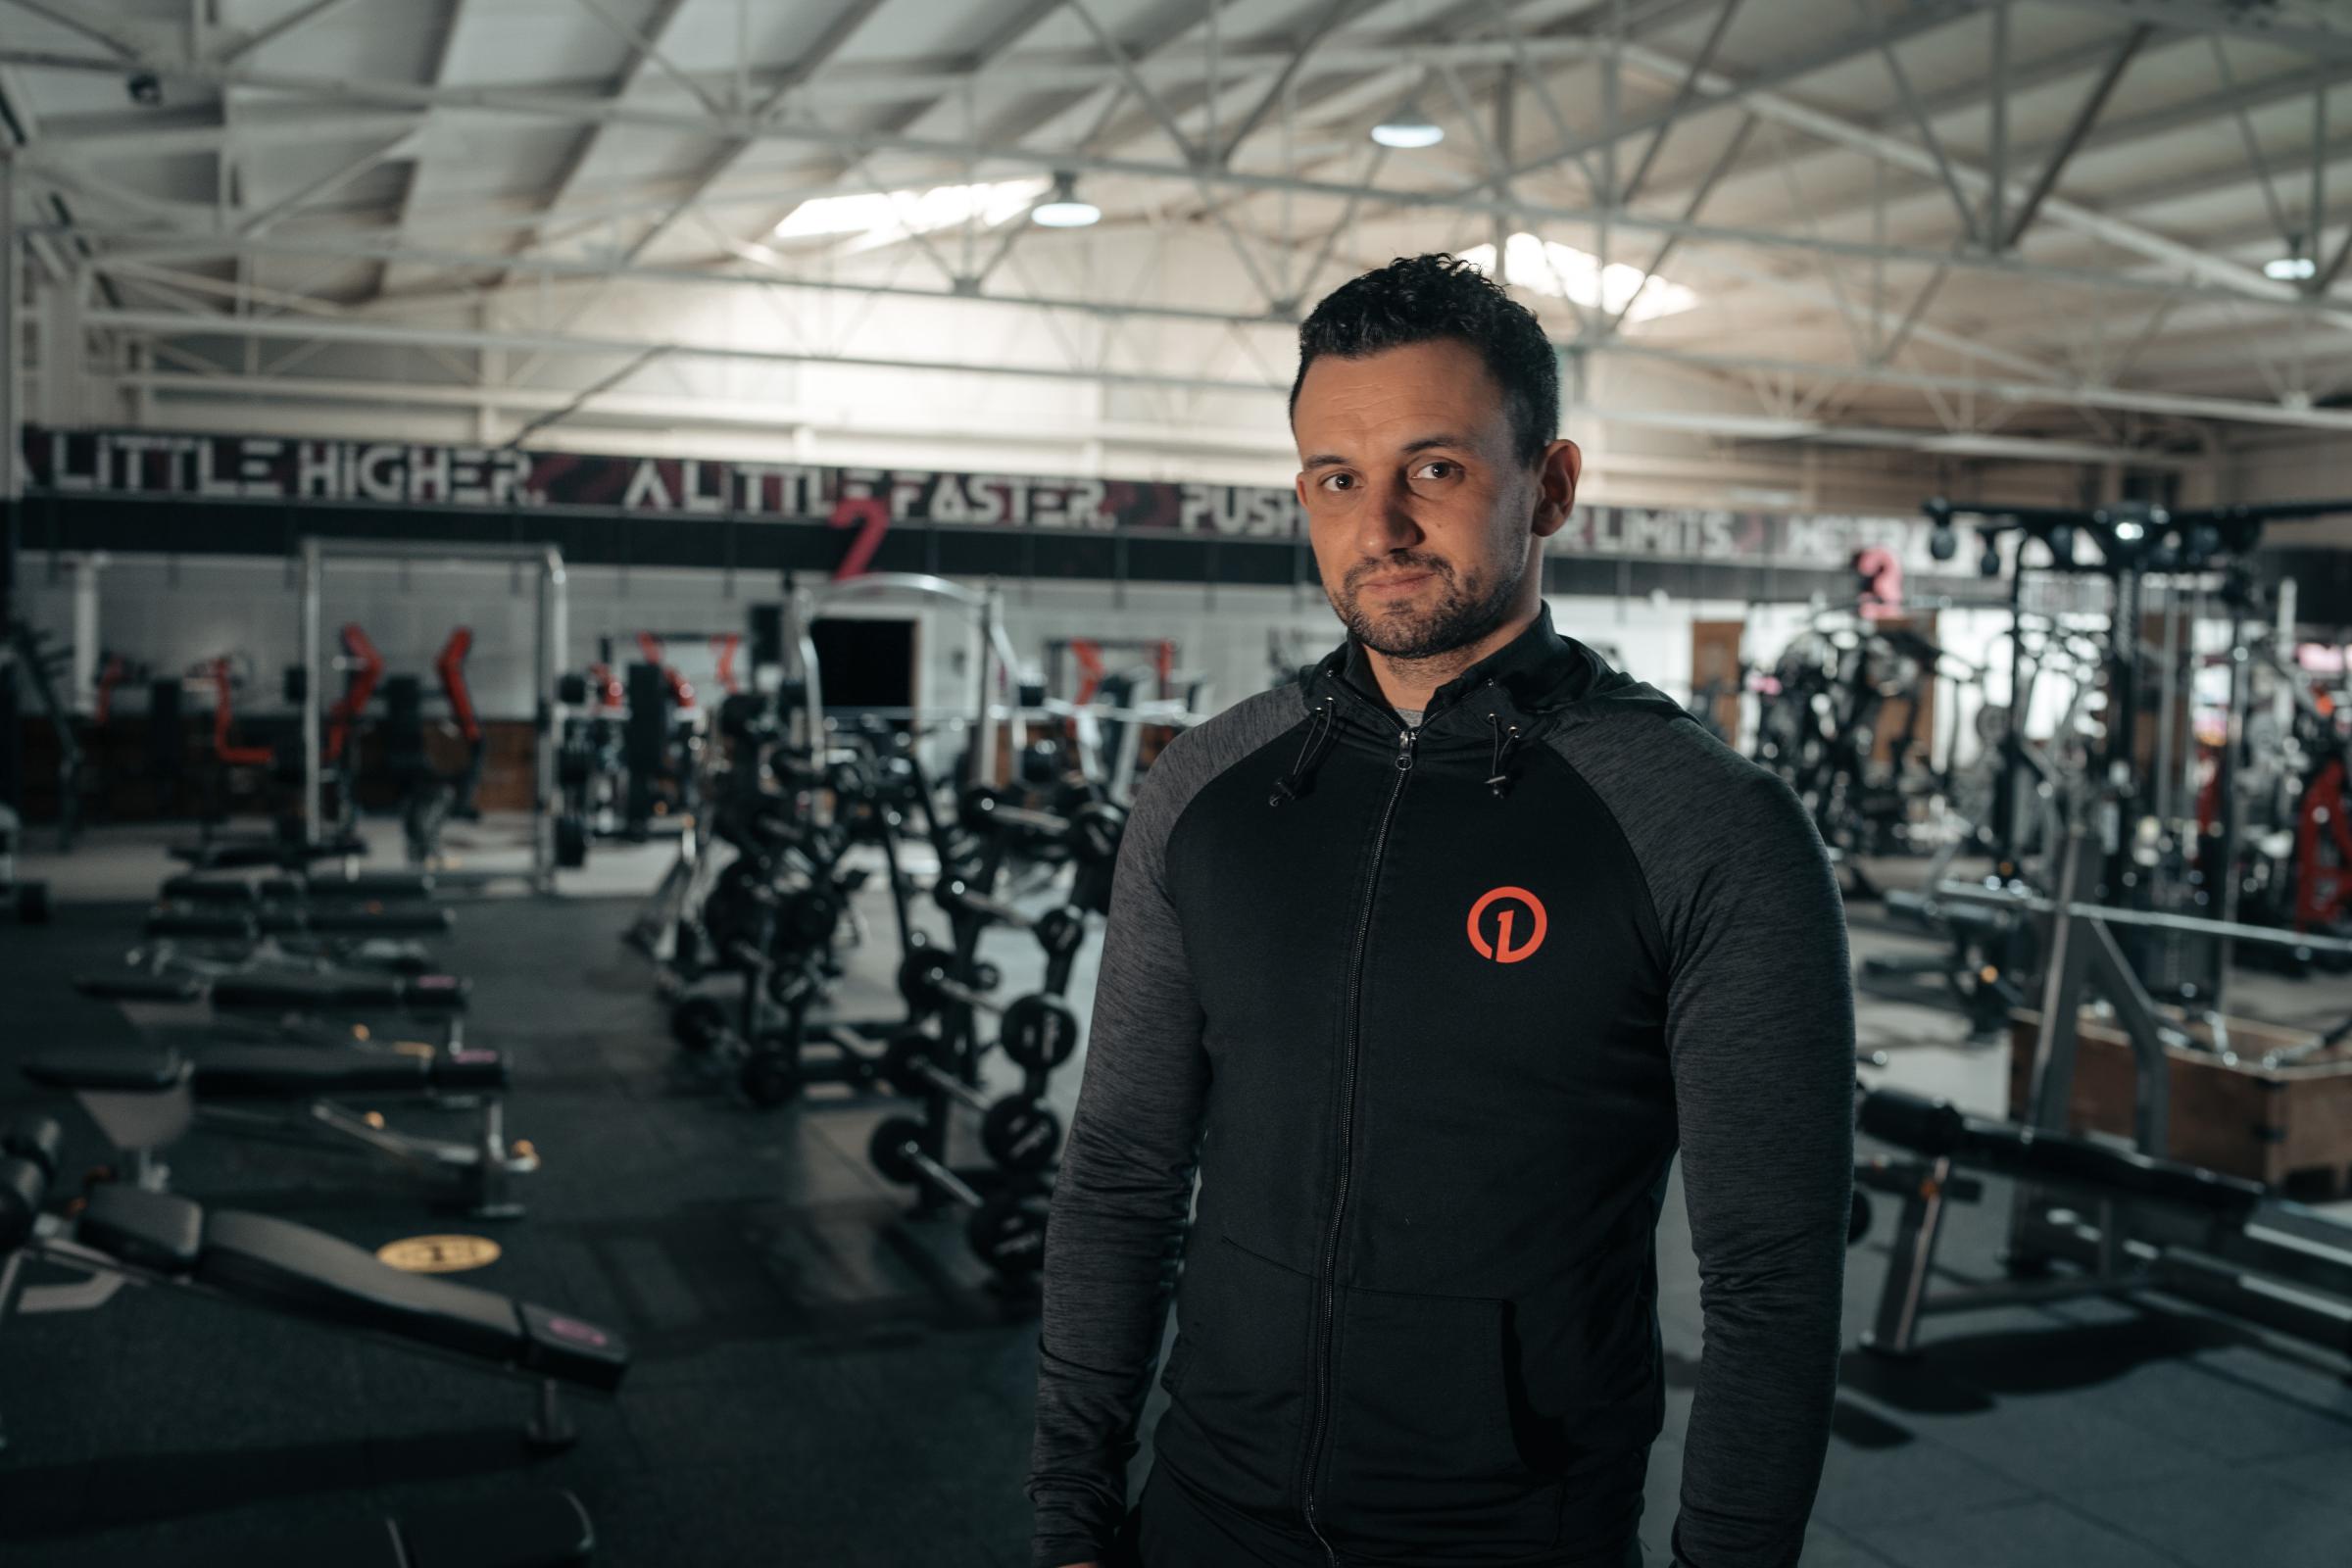 Alex Bodin, owner of One Gym in Newport. Picture: One Gym